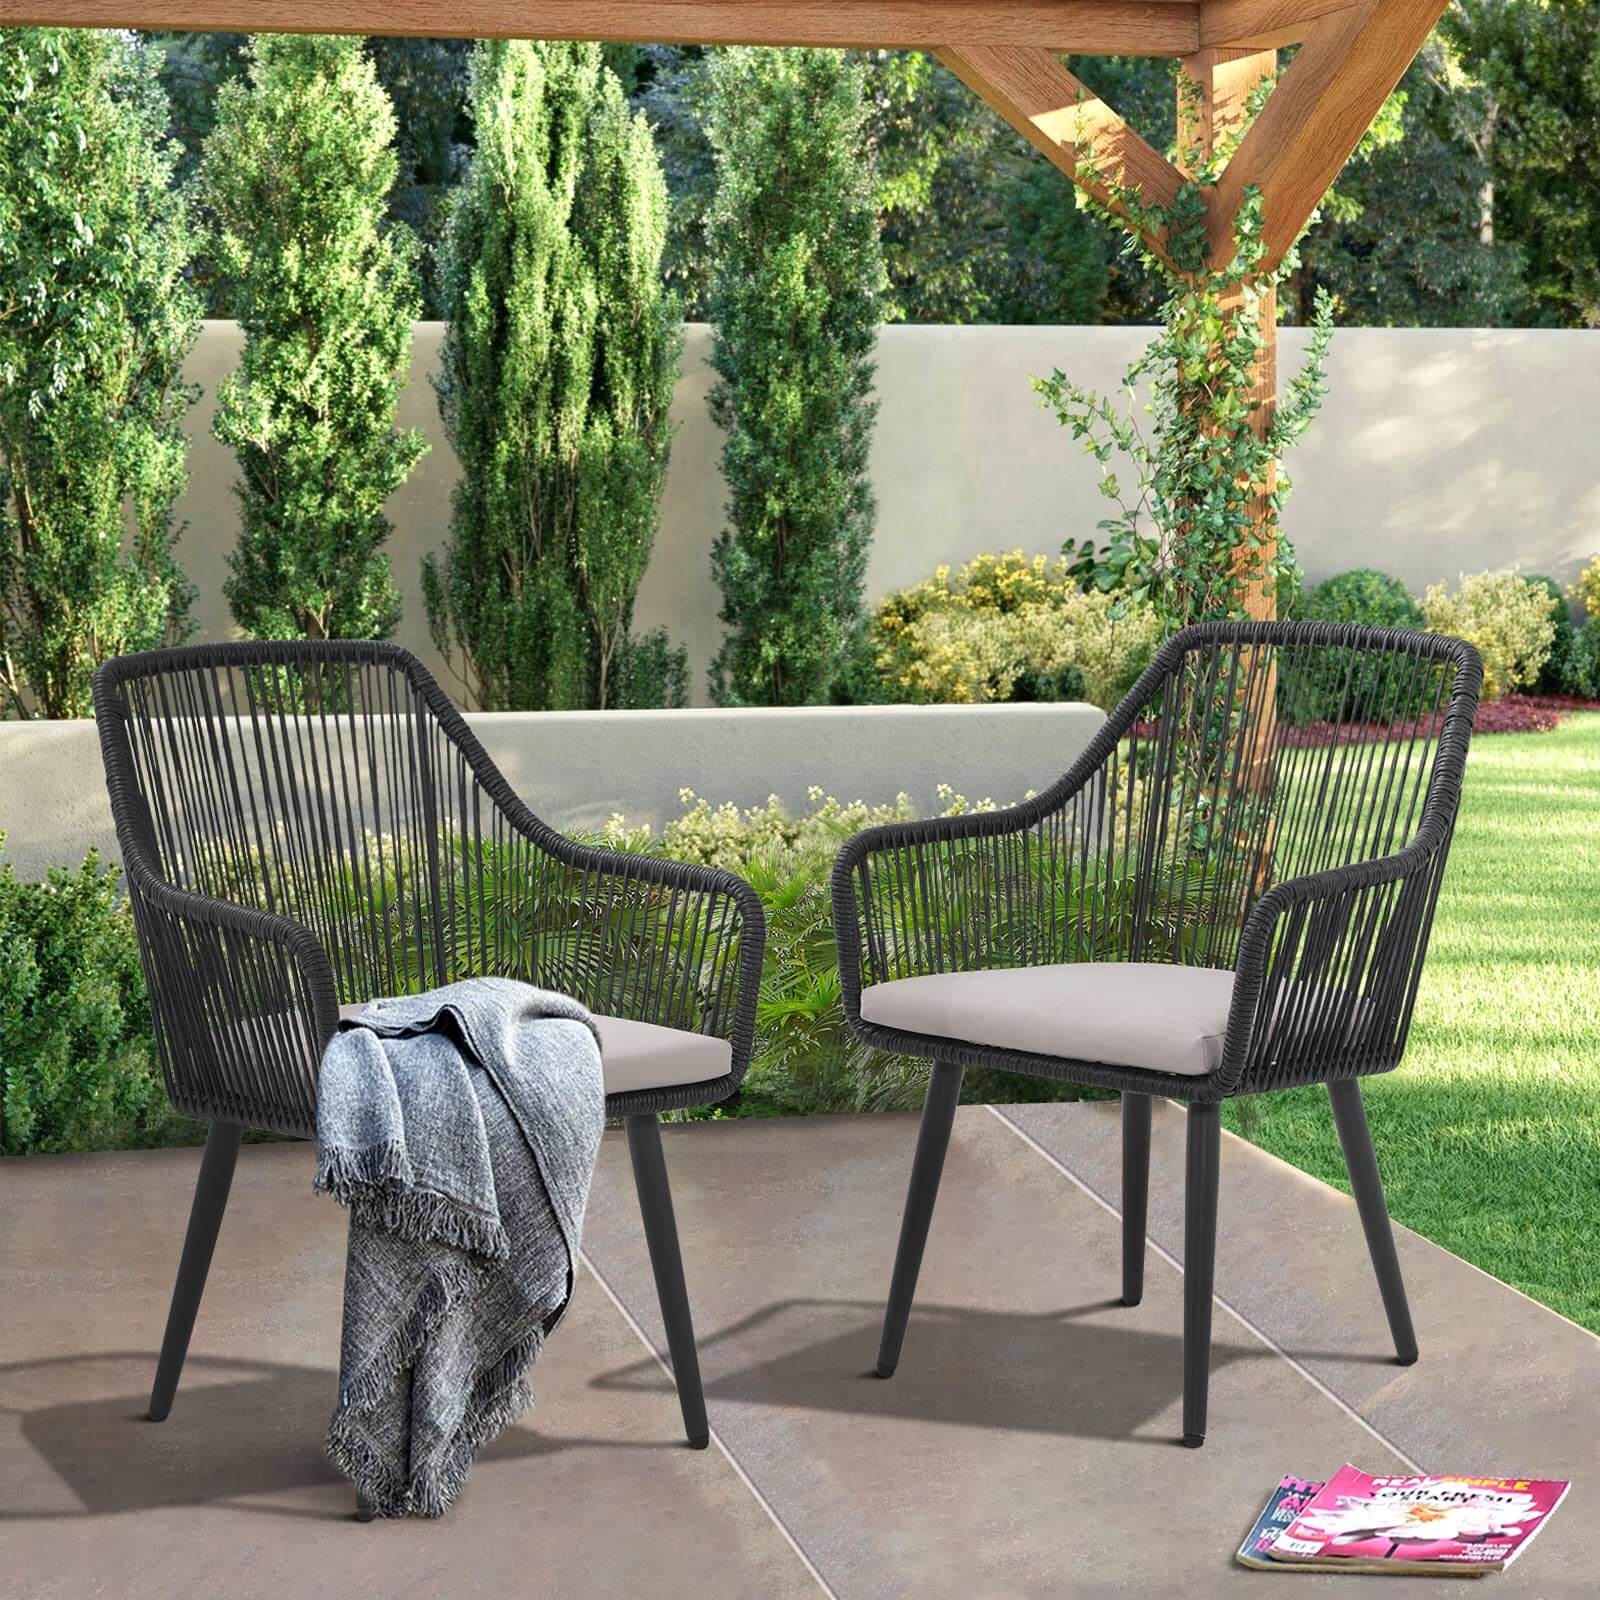 Wicker Outdoor Dining Chairs, All-Weather Woven Rope Rattan Patio Chairs